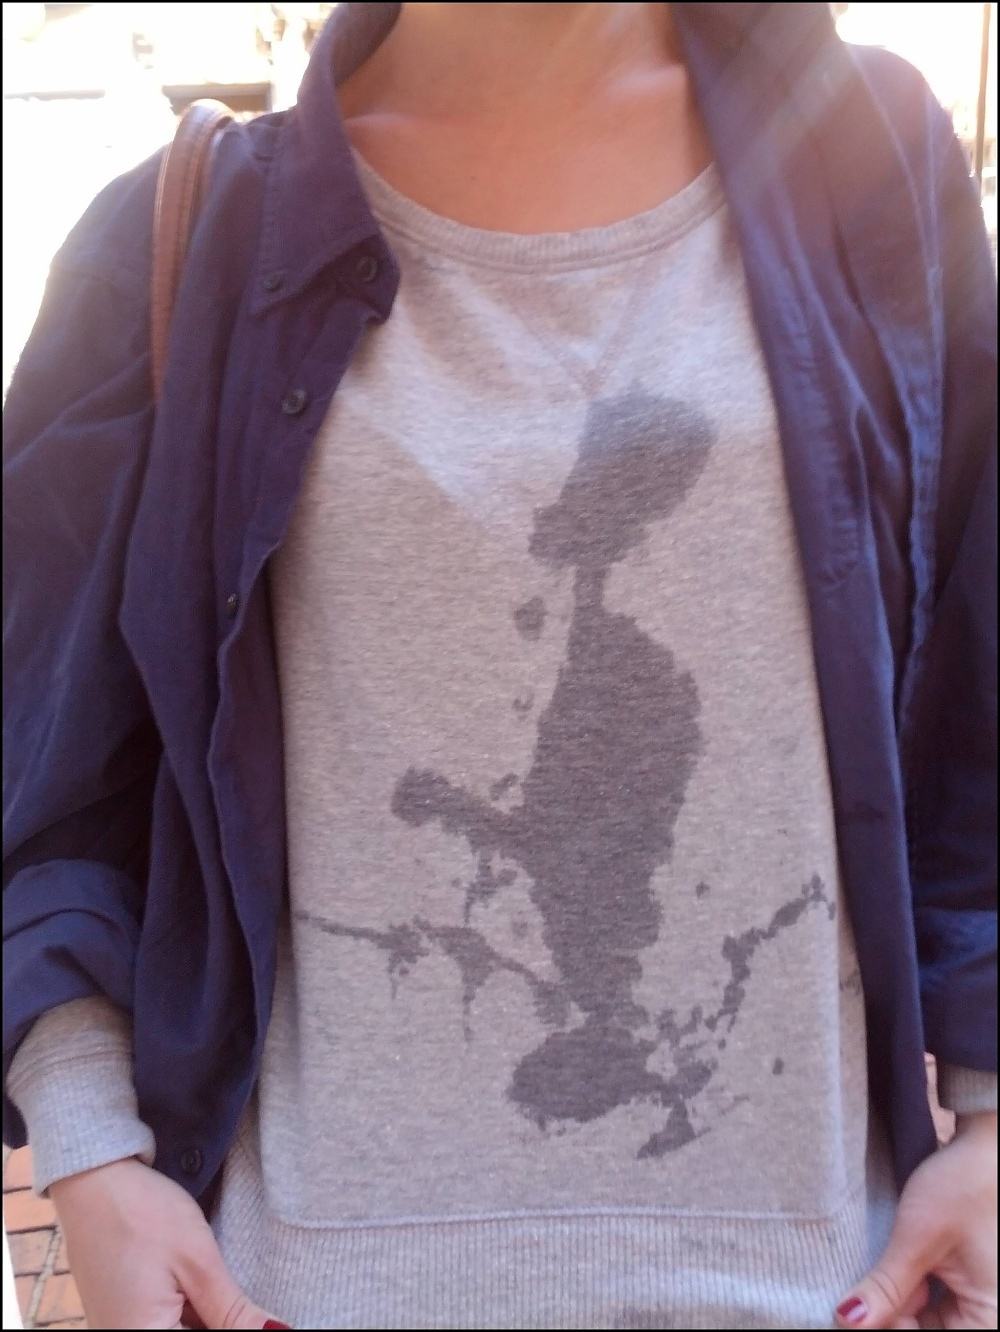 Obrázek -My girlfriend spilled water on her shirt - What do you see-      22.10.2012